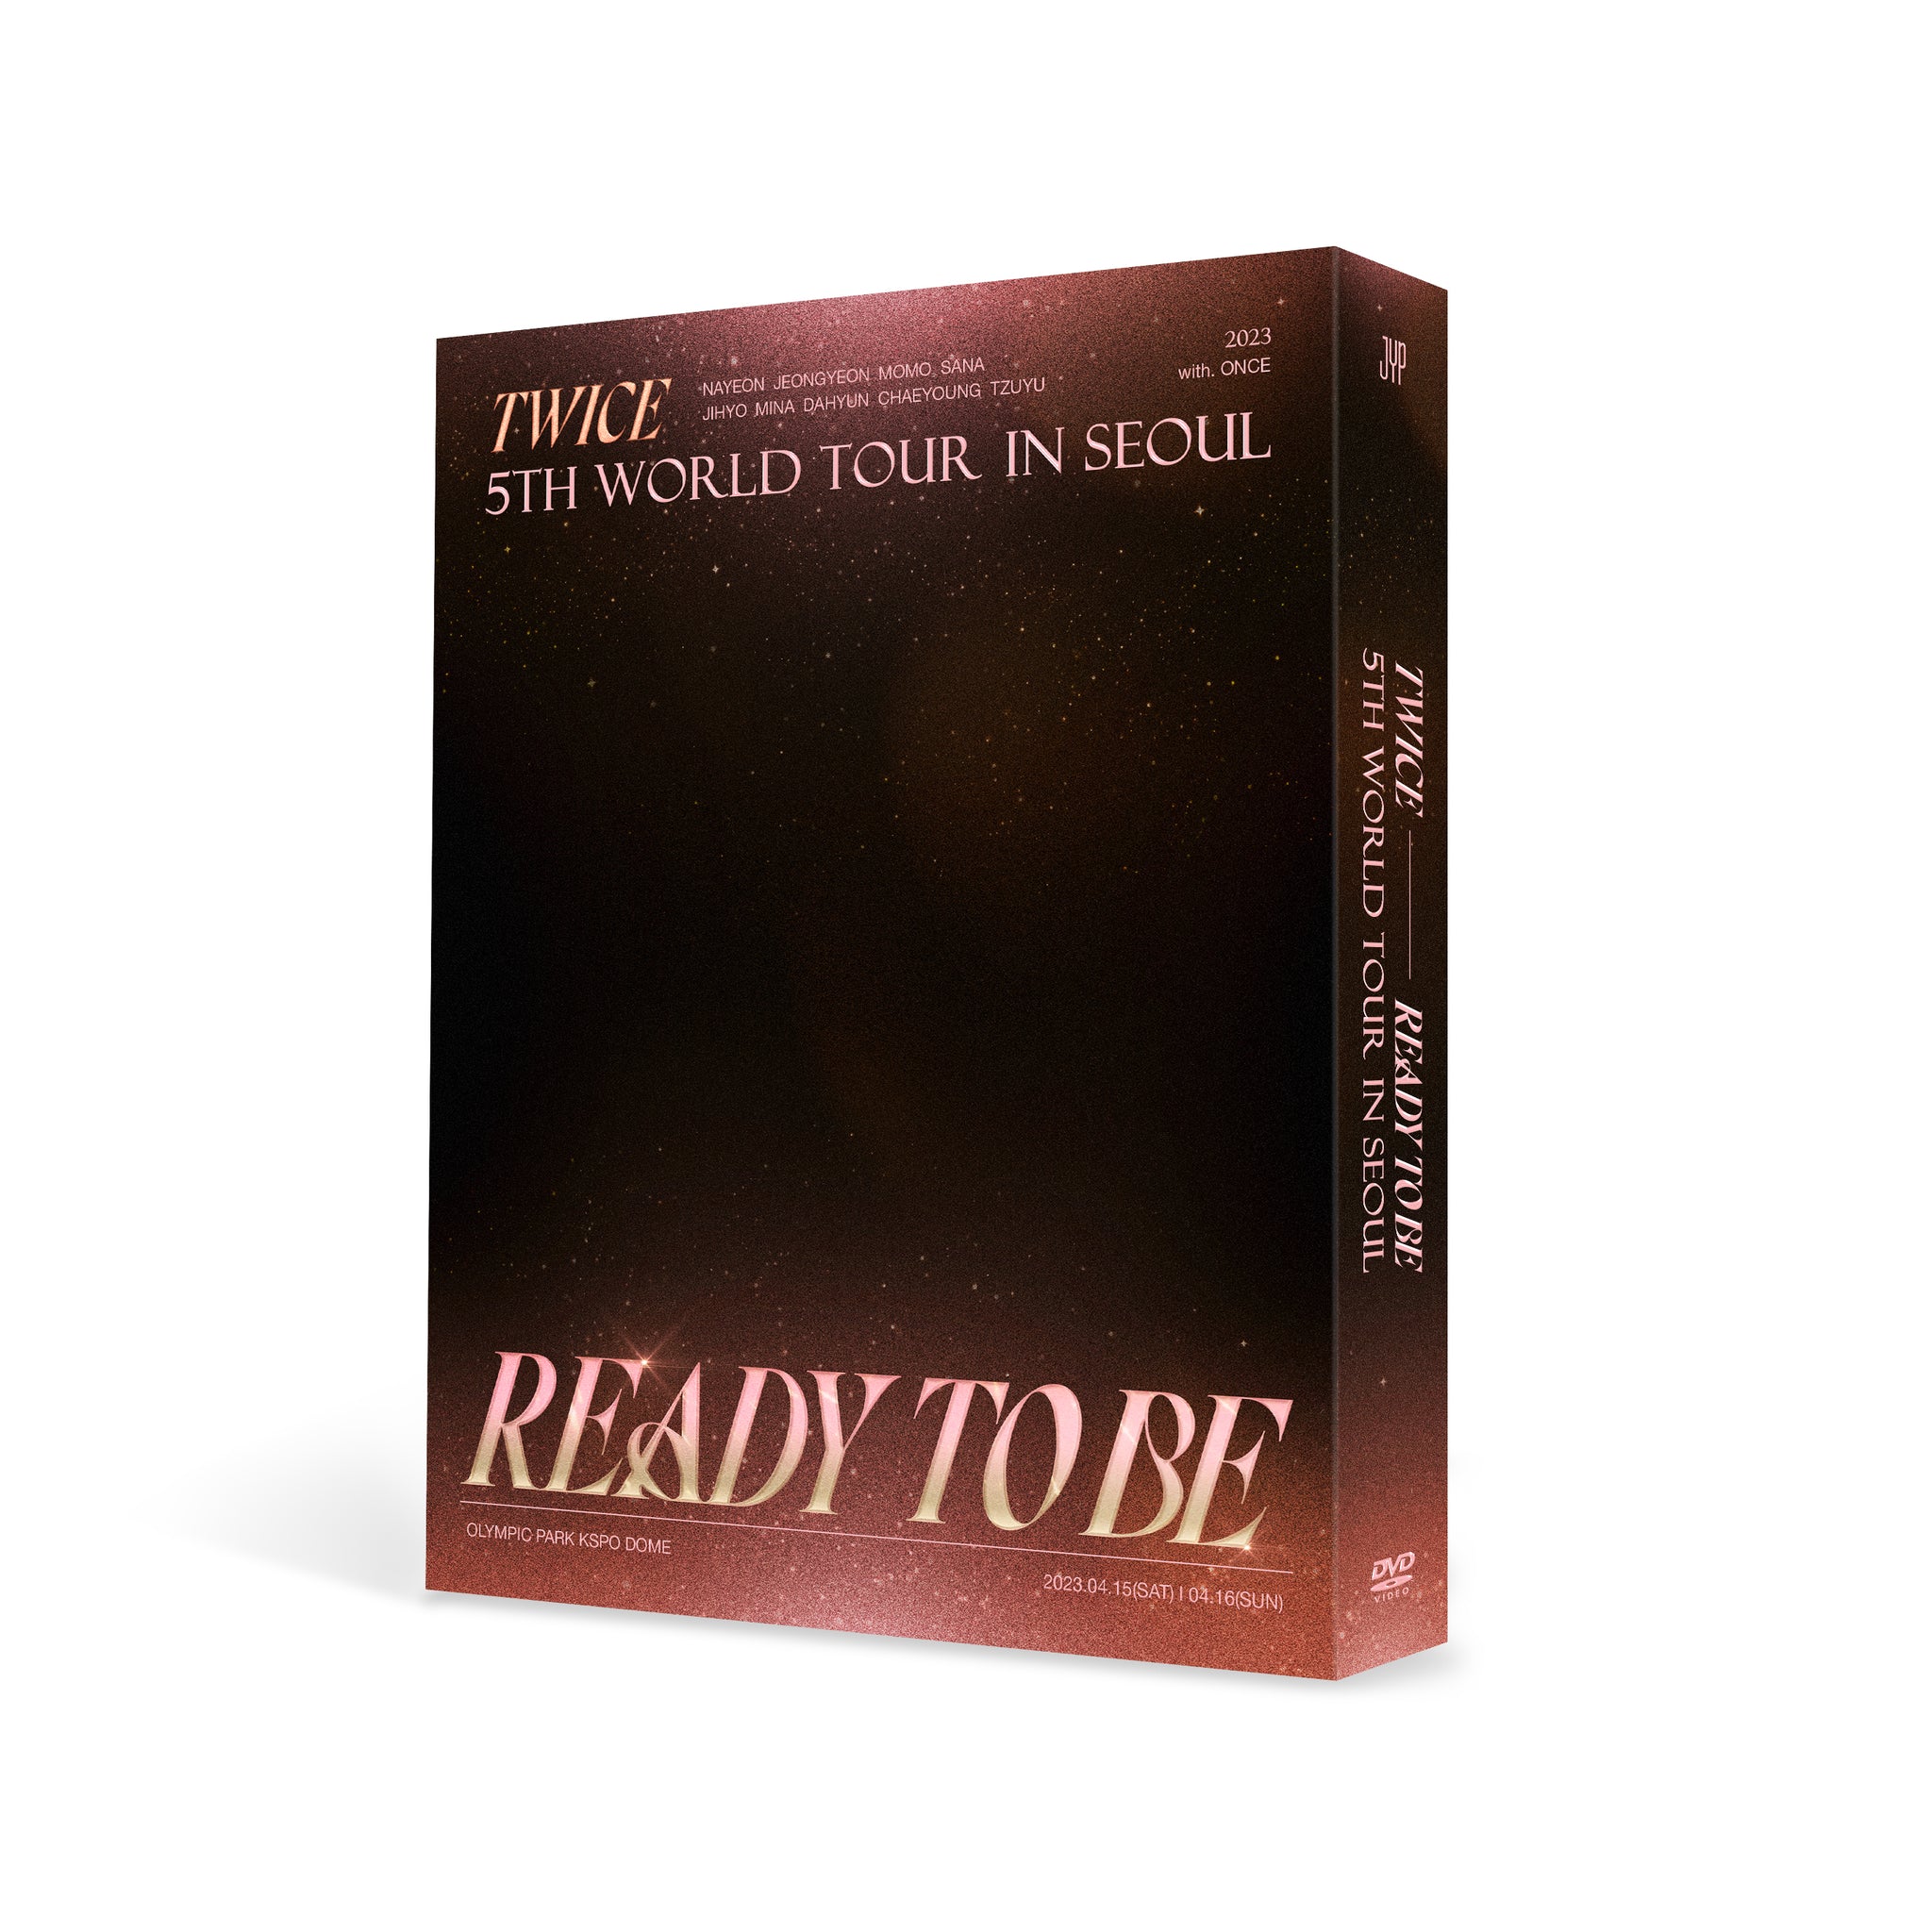 TWICE 5TH WORLD TOUR [READY TO BE] IN SEOUL DVD